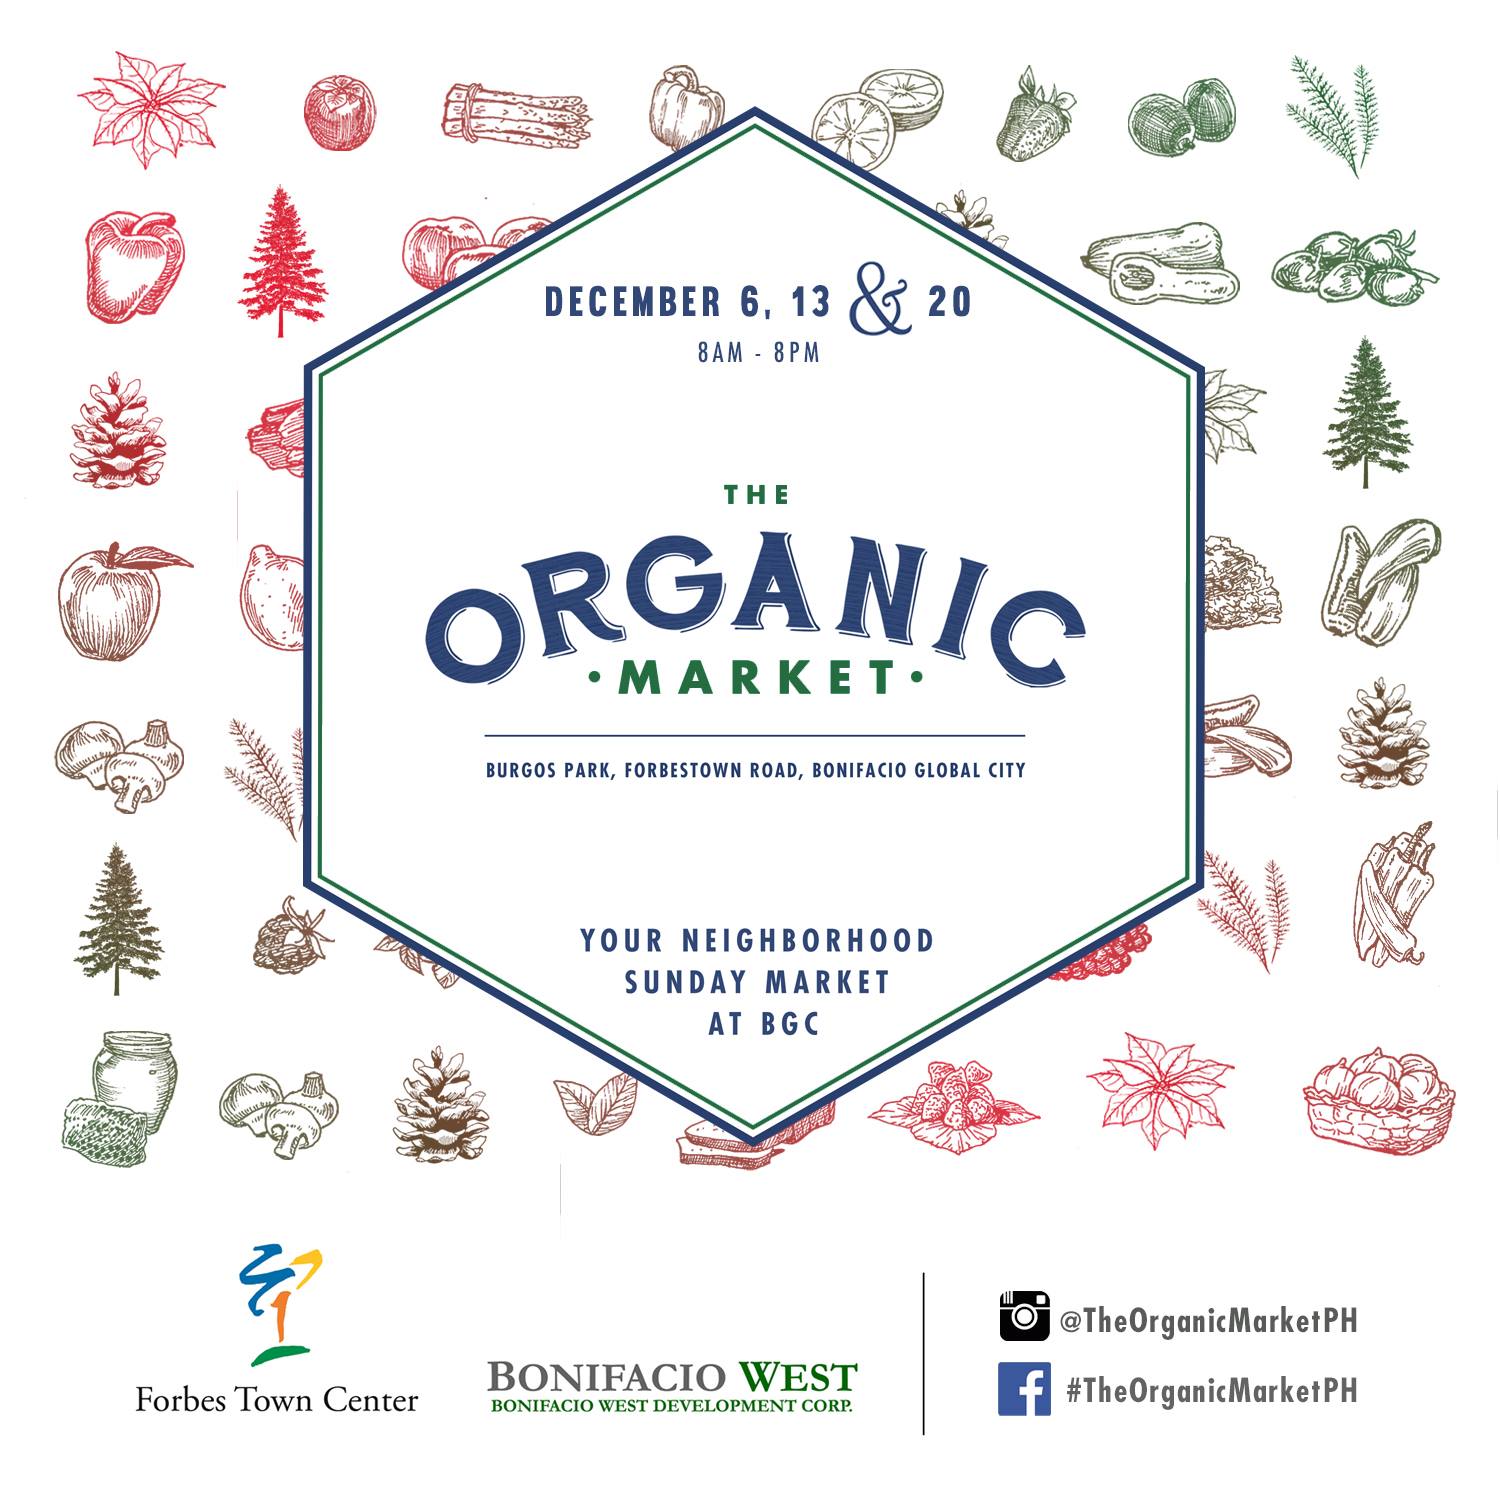 The Organic Market at Burgos Park clock Sunday, December 6 at 8:00am - 8:00pm Starts in about 5 hours · 81°F Mostly Cloudy pin Show Map The Organic Market Burgos Park, 1600 Taguig, Philippines The Organic Market is back for the holiday season! We are your local BGC Sunday market that specializes in Organic and Natural products for the conscious consumer. The Organic Market team has actively worked to put together a curated list of like-minded vendors and suppliers in a one of a kind Sunday Market experience. Come visit us this December 6, 13 & 20 in Burgos Park!